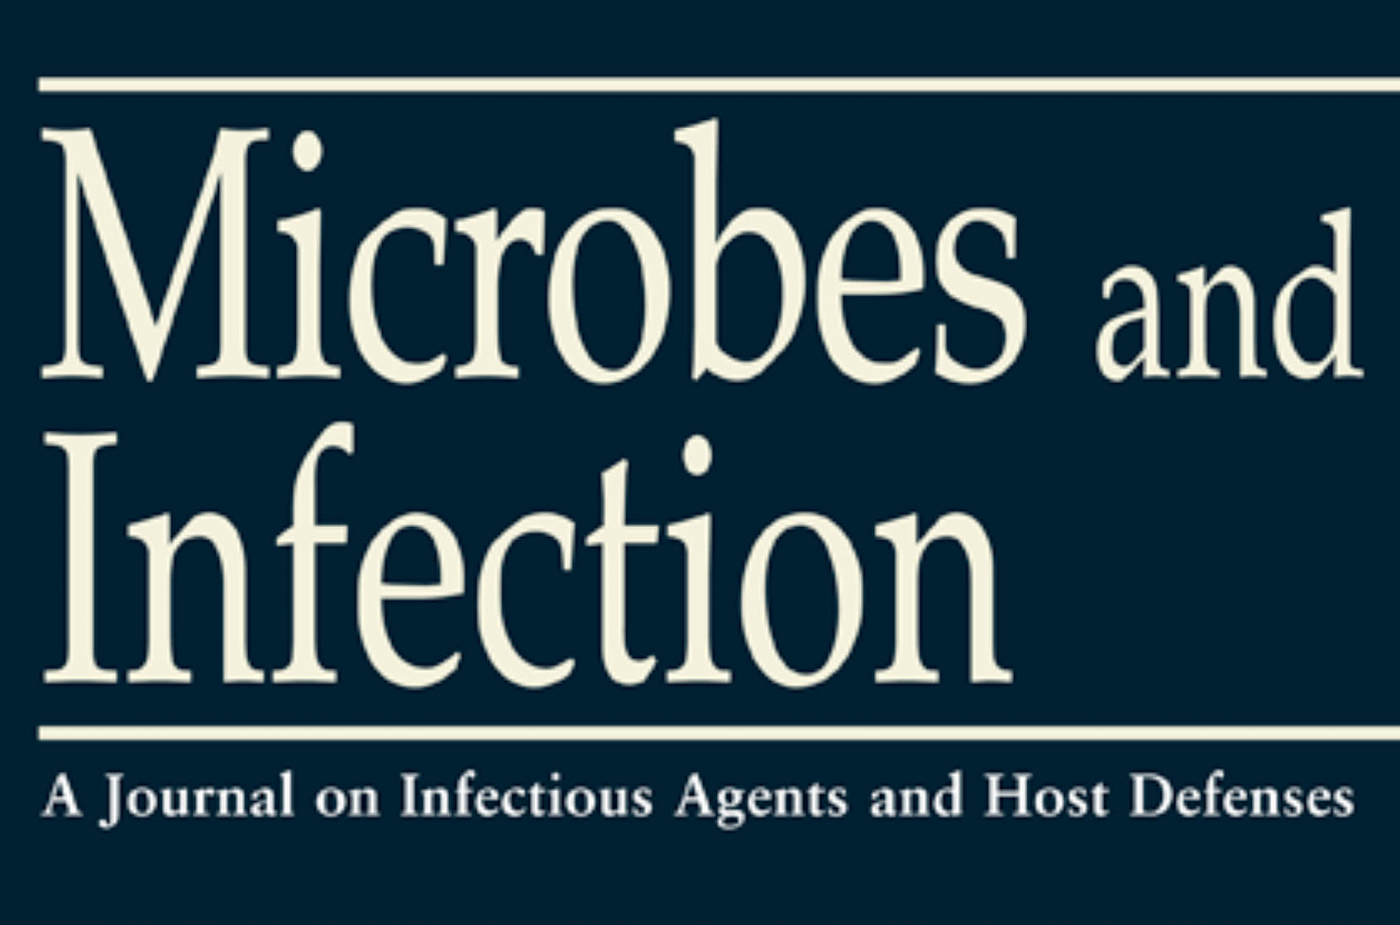 Publications scientifiques - Microbes and infection